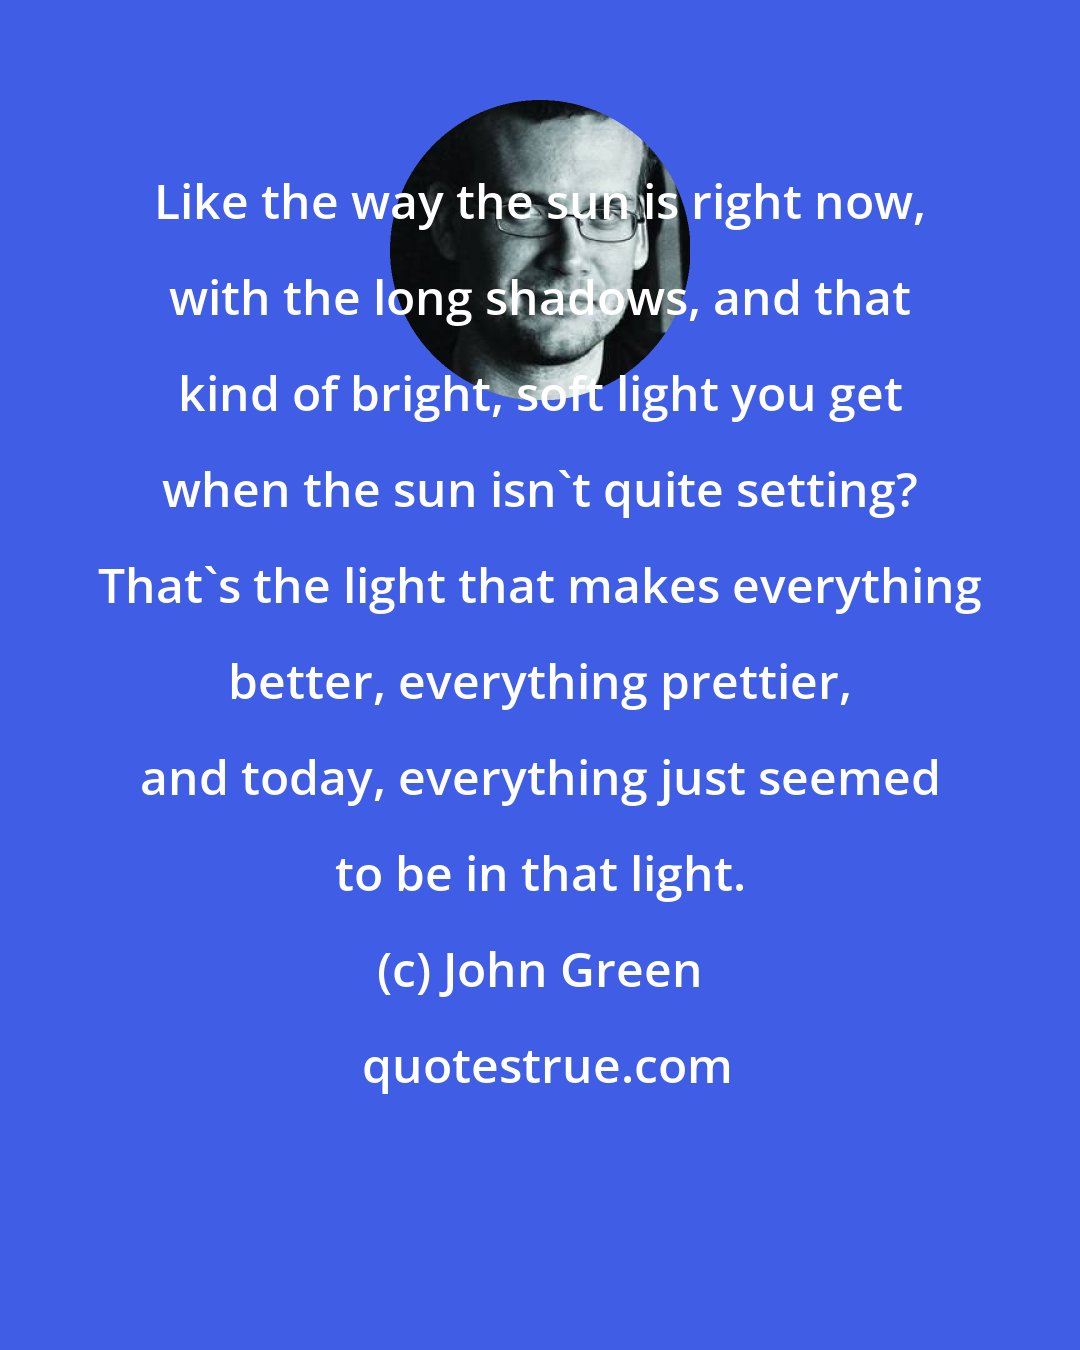 John Green: Like the way the sun is right now, with the long shadows, and that kind of bright, soft light you get when the sun isn't quite setting? That's the light that makes everything better, everything prettier, and today, everything just seemed to be in that light.